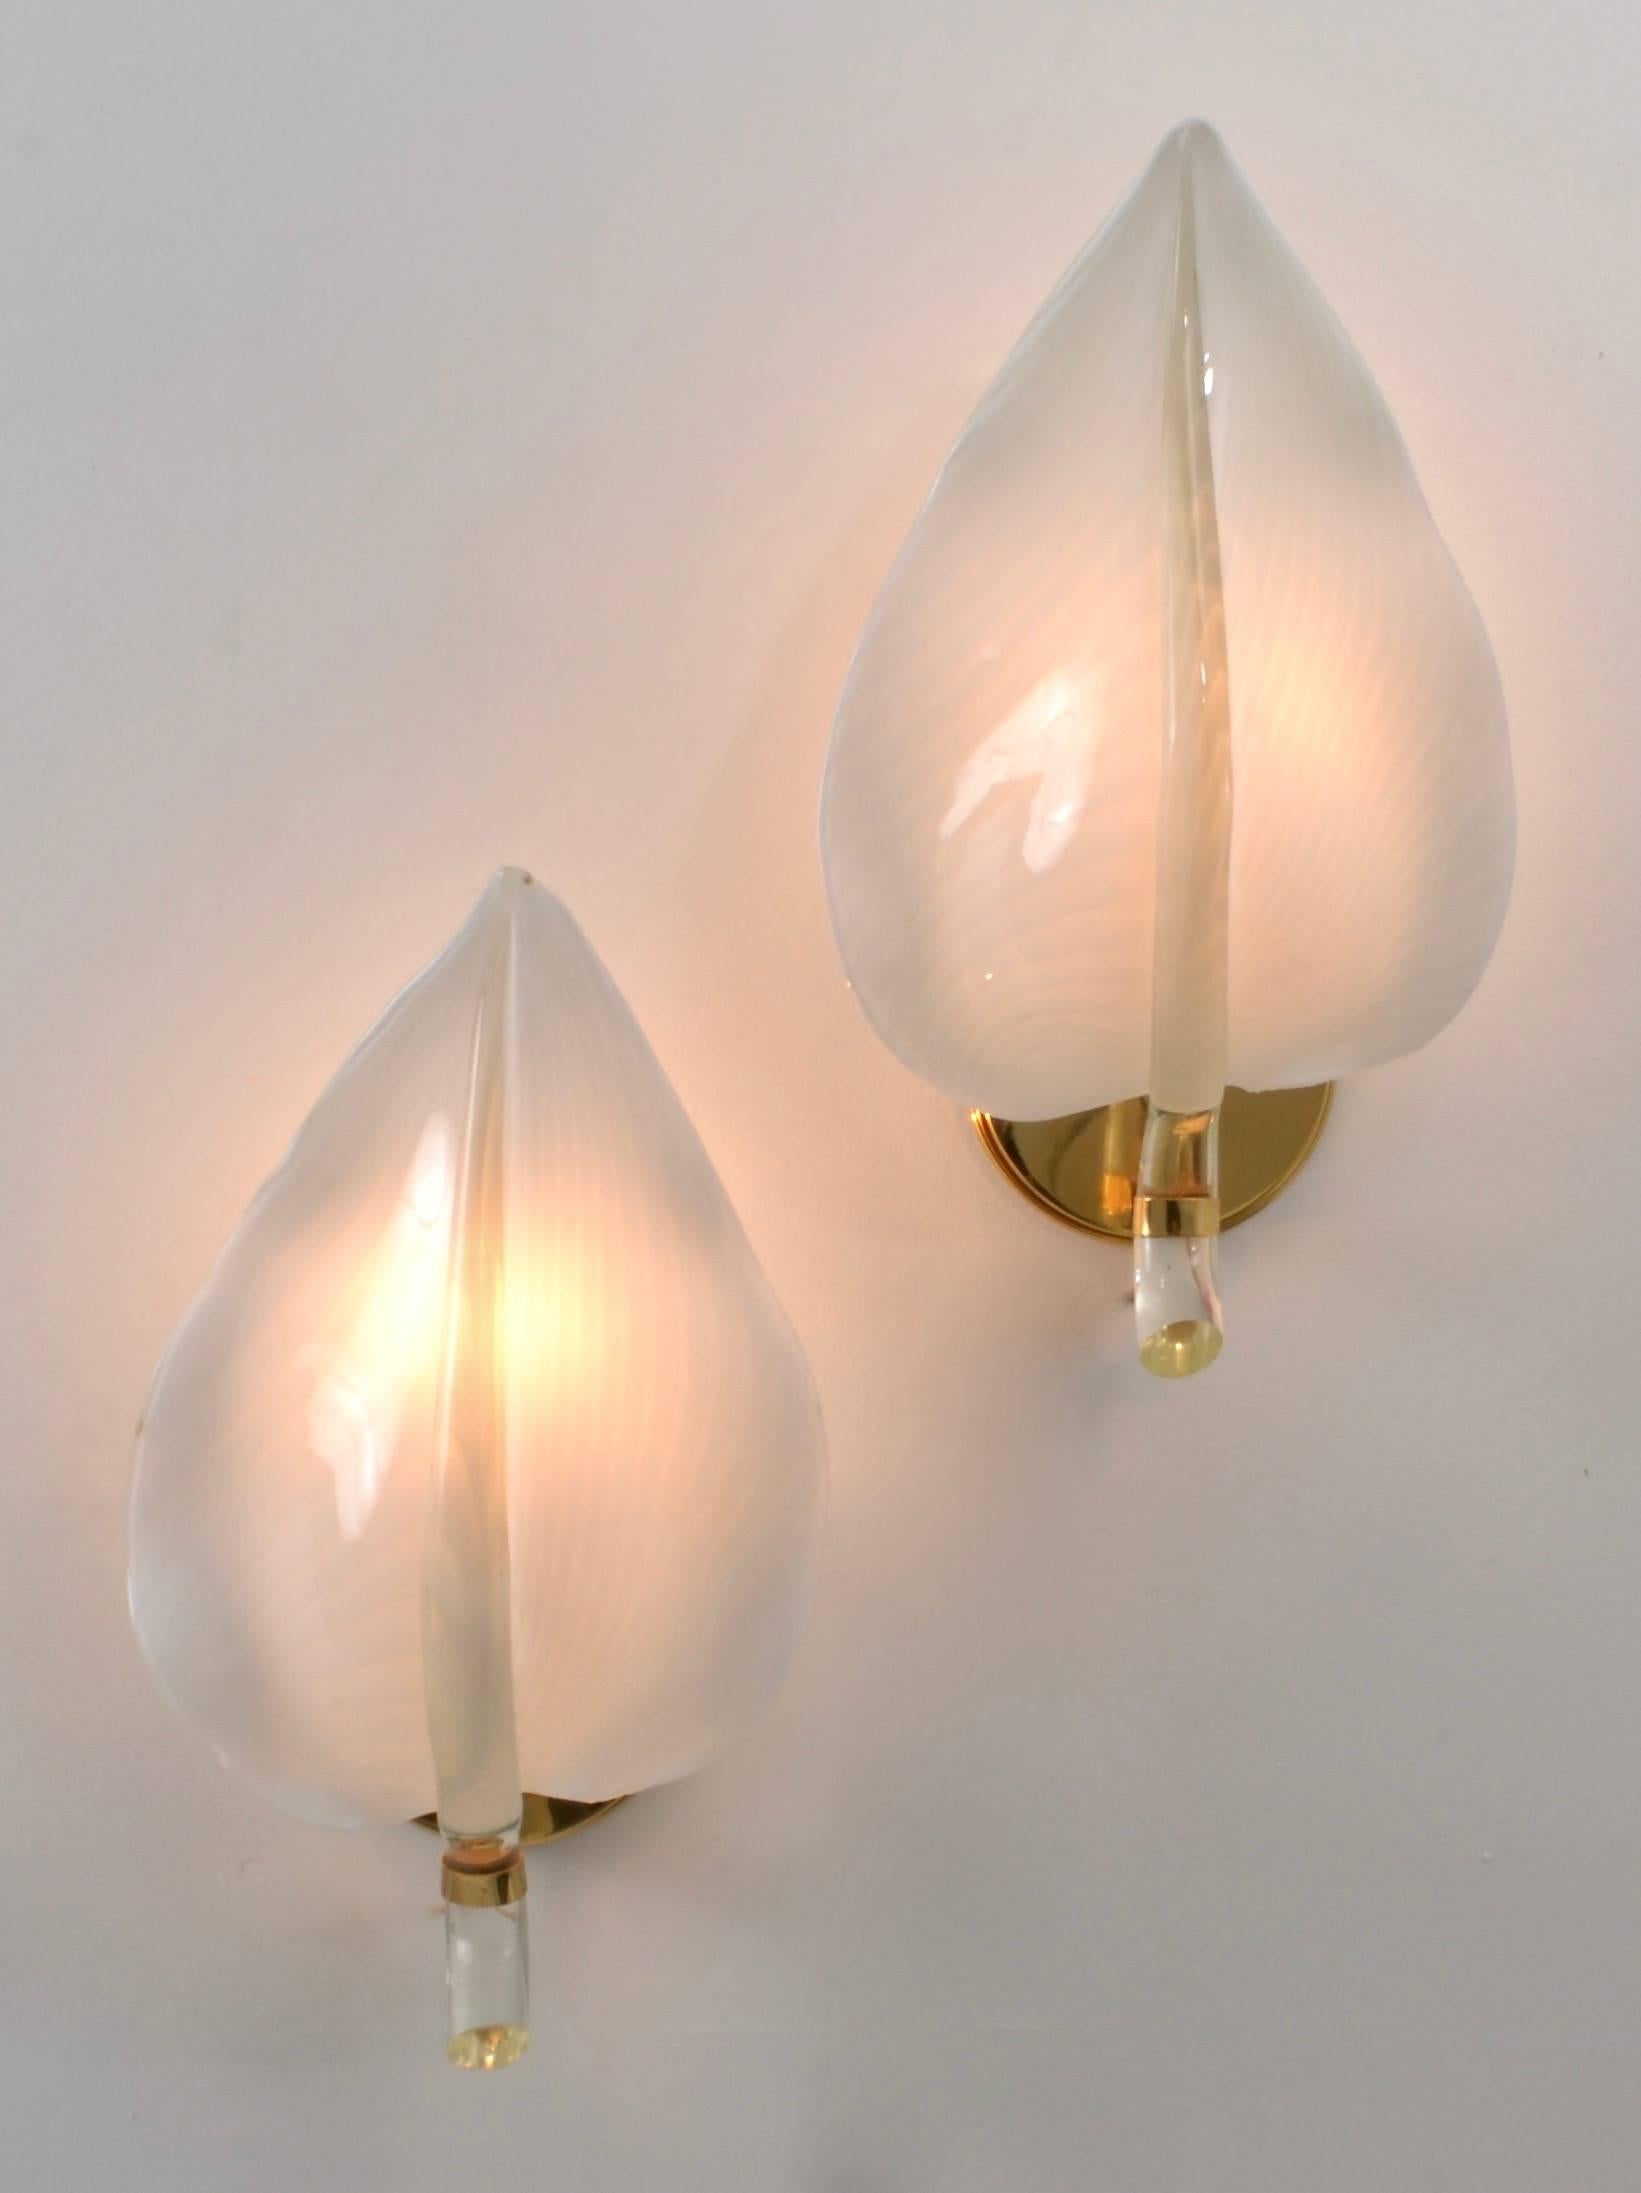 Hand blown Murano Glass leaves featuring a subtle striped pattern, set into a brass fixture. They take a standard bulb up to 60 watts. New wiring. 